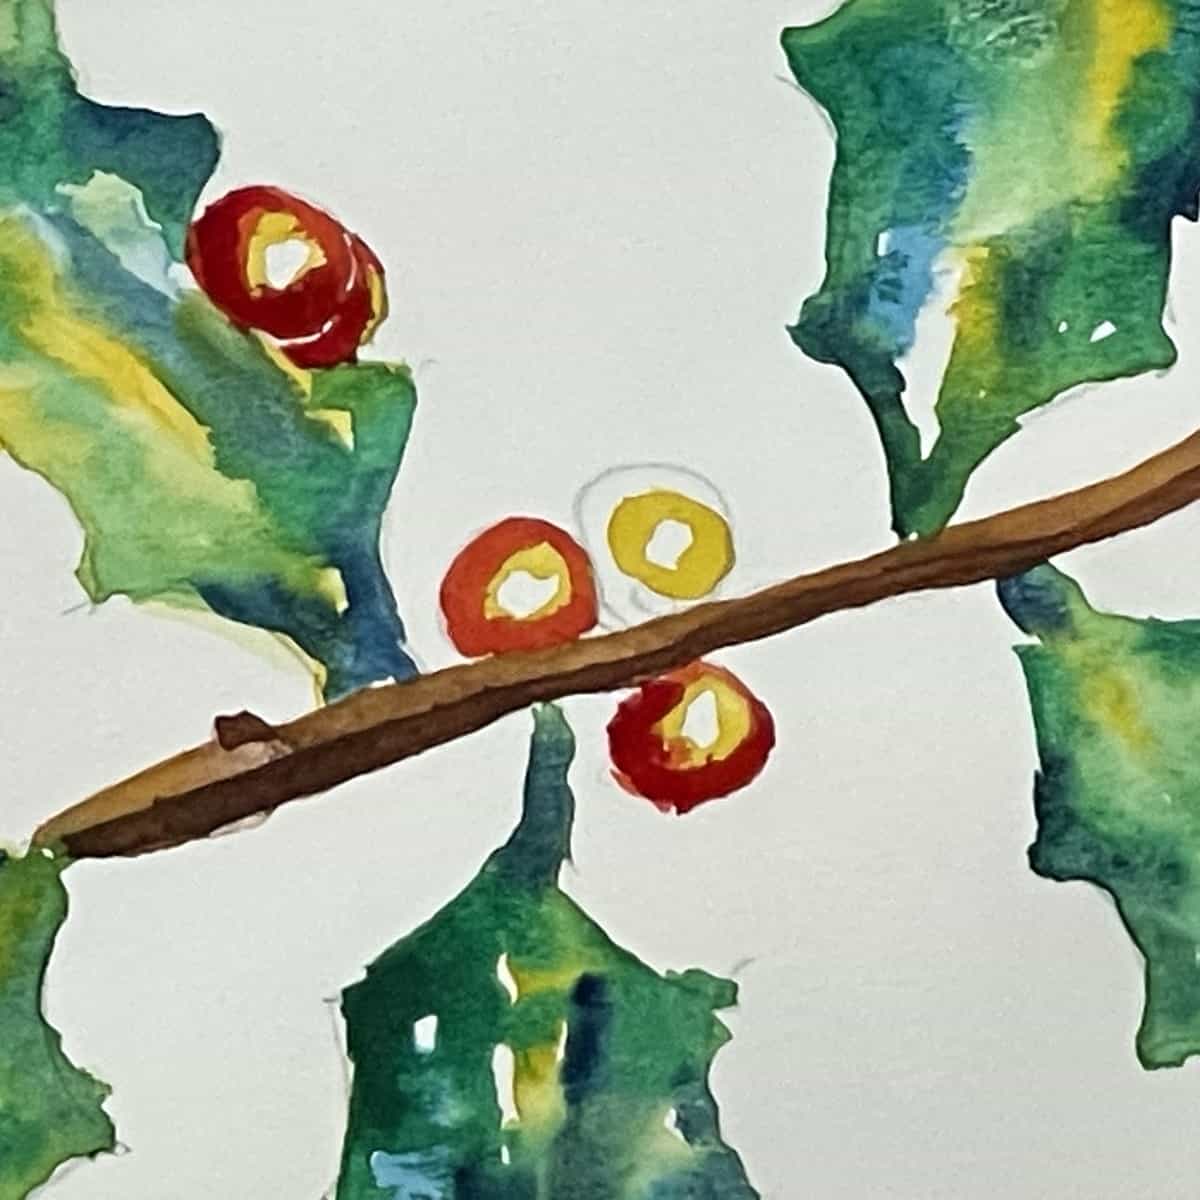 A watercolor painting of a sprig of holly, up close showing the process of painting red, yellow and crimson into the berries.